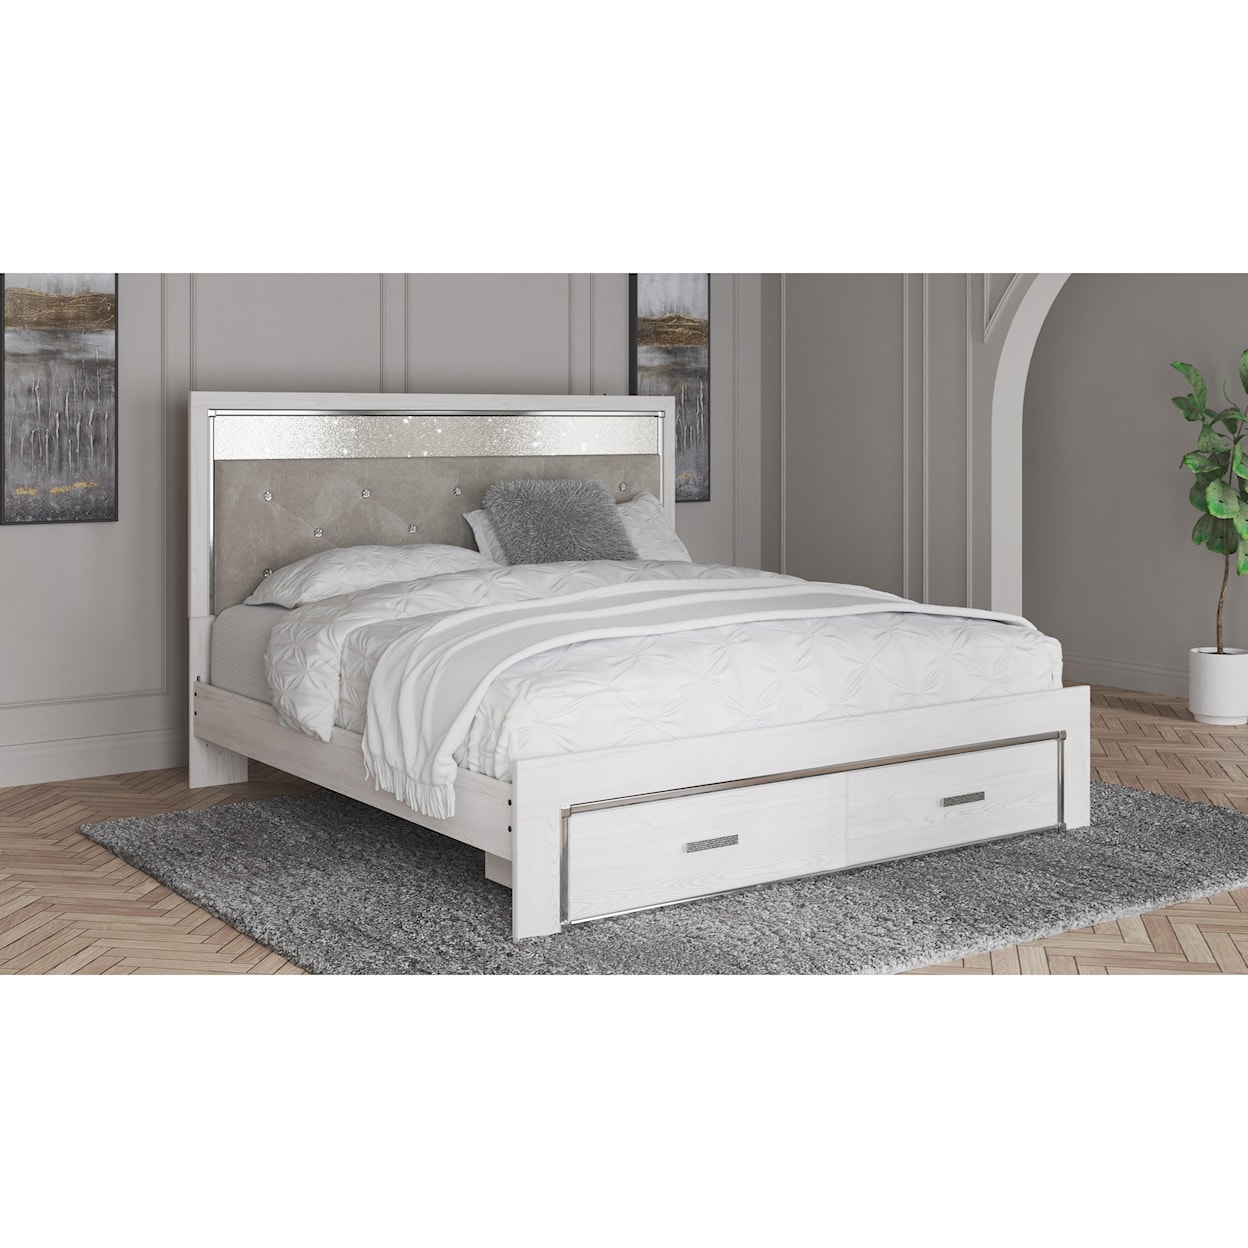 Signature Altyra King Storage Bed with Upholstered Headboard